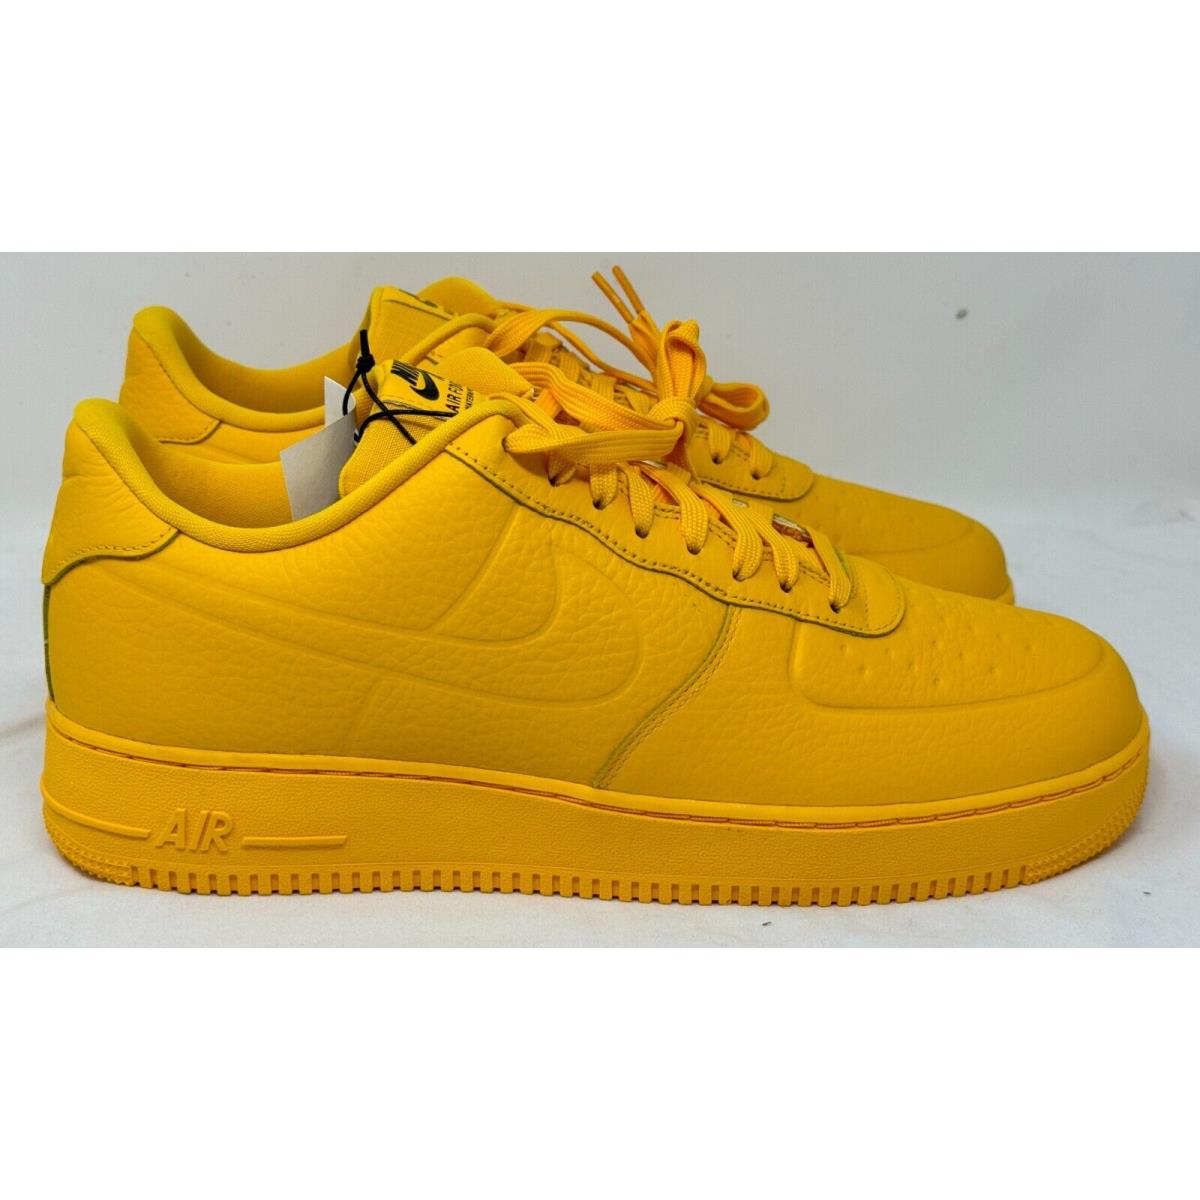 Nike Air Force 1 `07 Pro Tech WP FB8875 700 Size 12 University Gold Noboxlid - Yellow